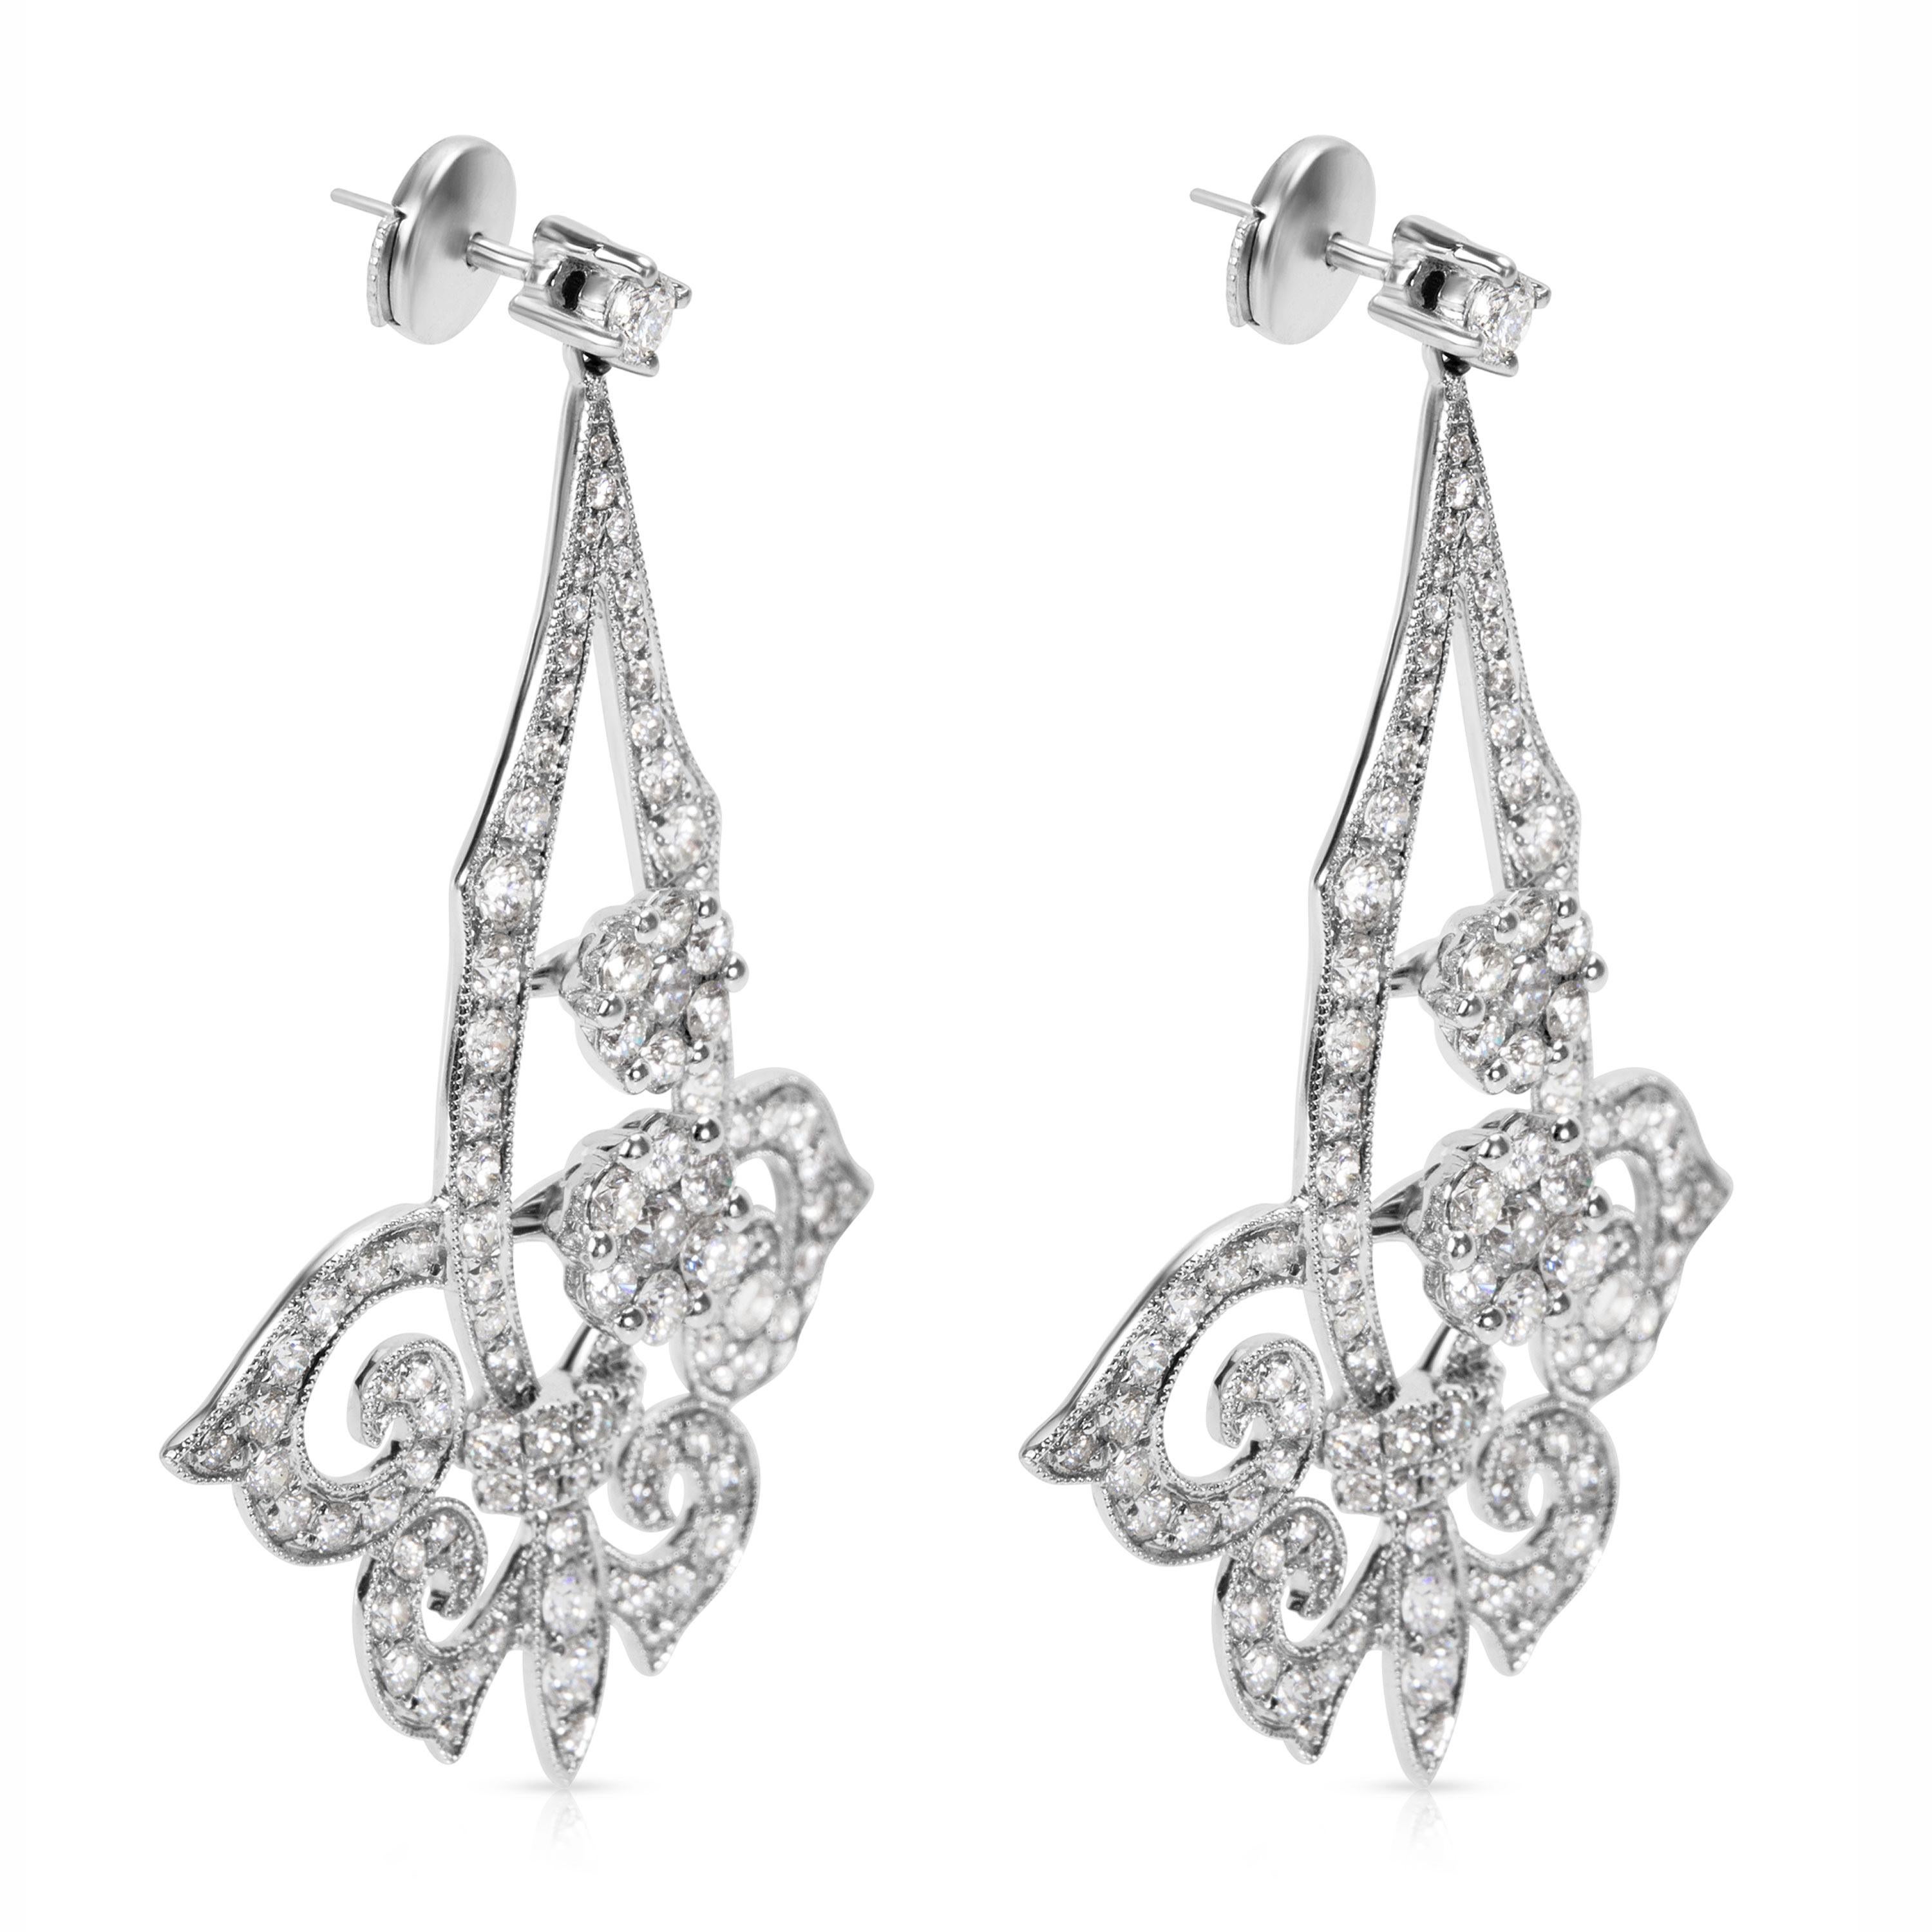 These earrings are brand new and unworn. The earrings measure 1.75 inches in length.

Stone Type: Diamond
# of Stones: 278
Stone Weight: 4.65 ctw
Stone Shape: Round
Stone Color: F-G 
Stone Clarity: VS1-VS2